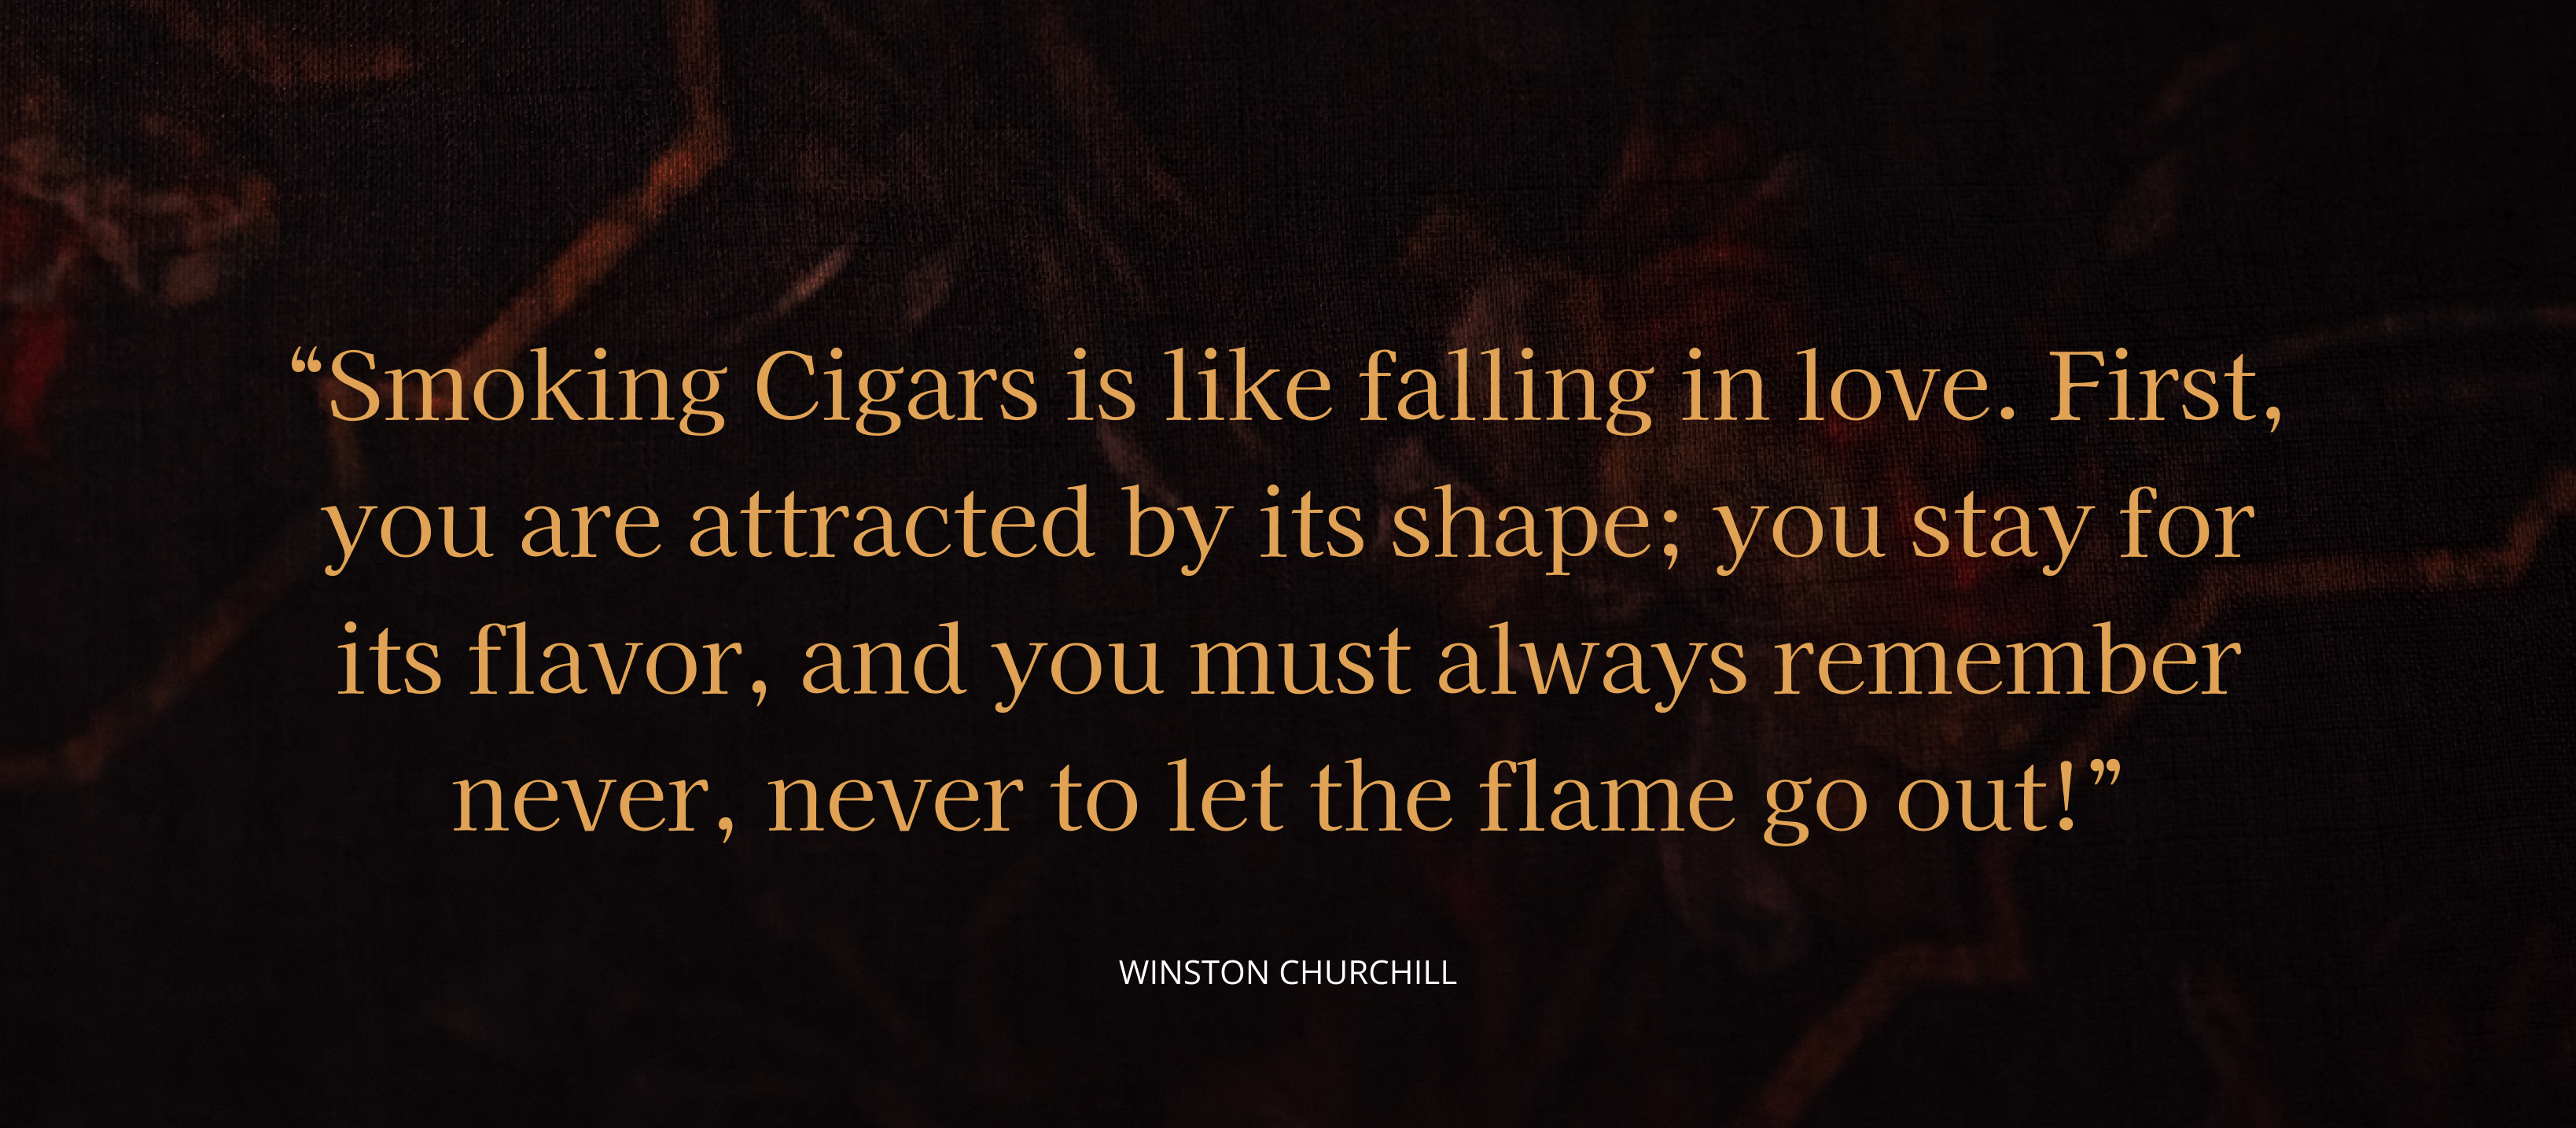 Smoking Cigars is like falling in love. First, you are attracted by its shape; you stay for its flavor, and you must always remember never, never to let the flame go out!” 